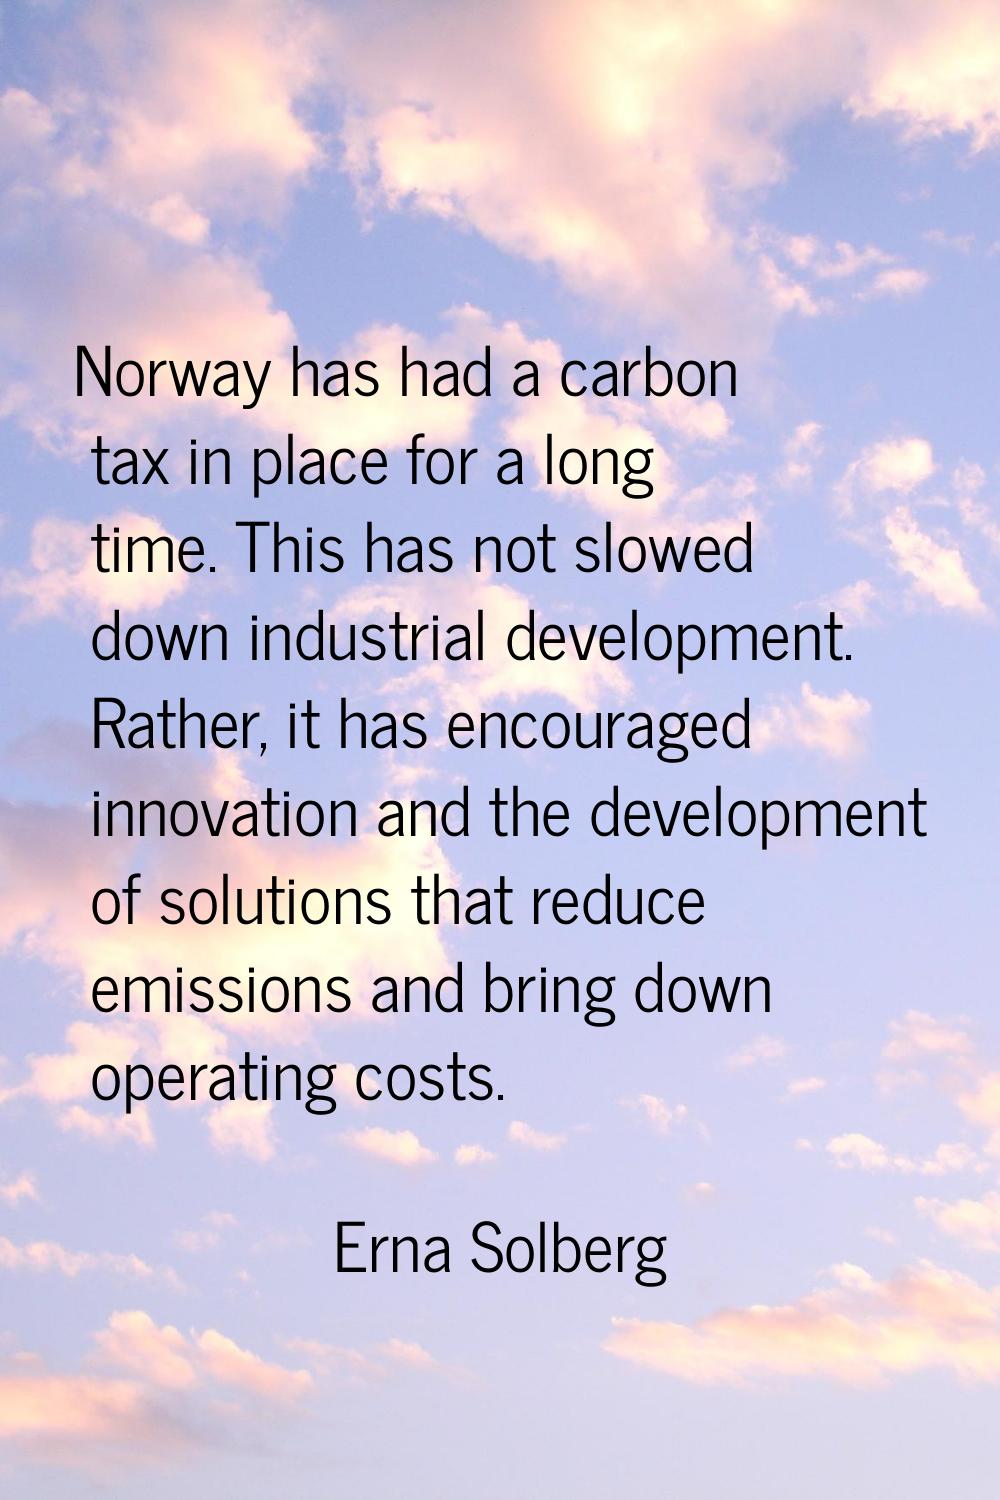 Norway has had a carbon tax in place for a long time. This has not slowed down industrial developme